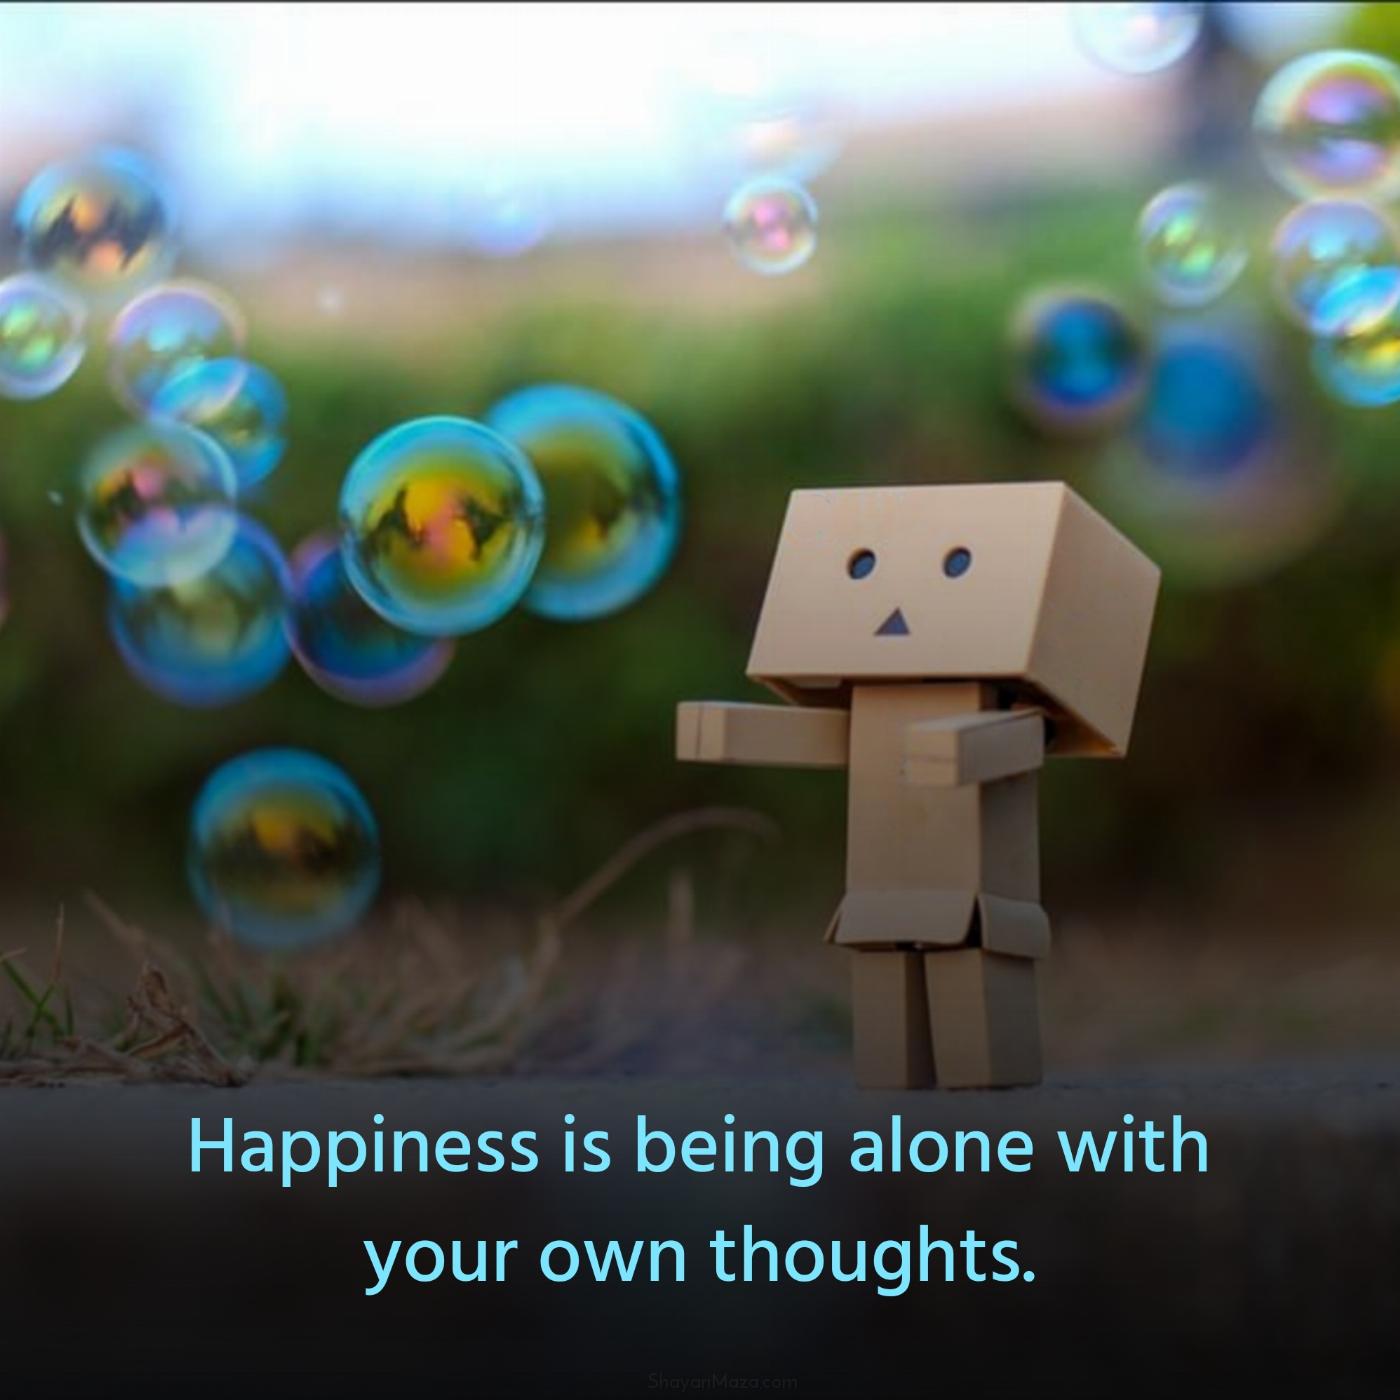 Happiness is being alone with your own thoughts